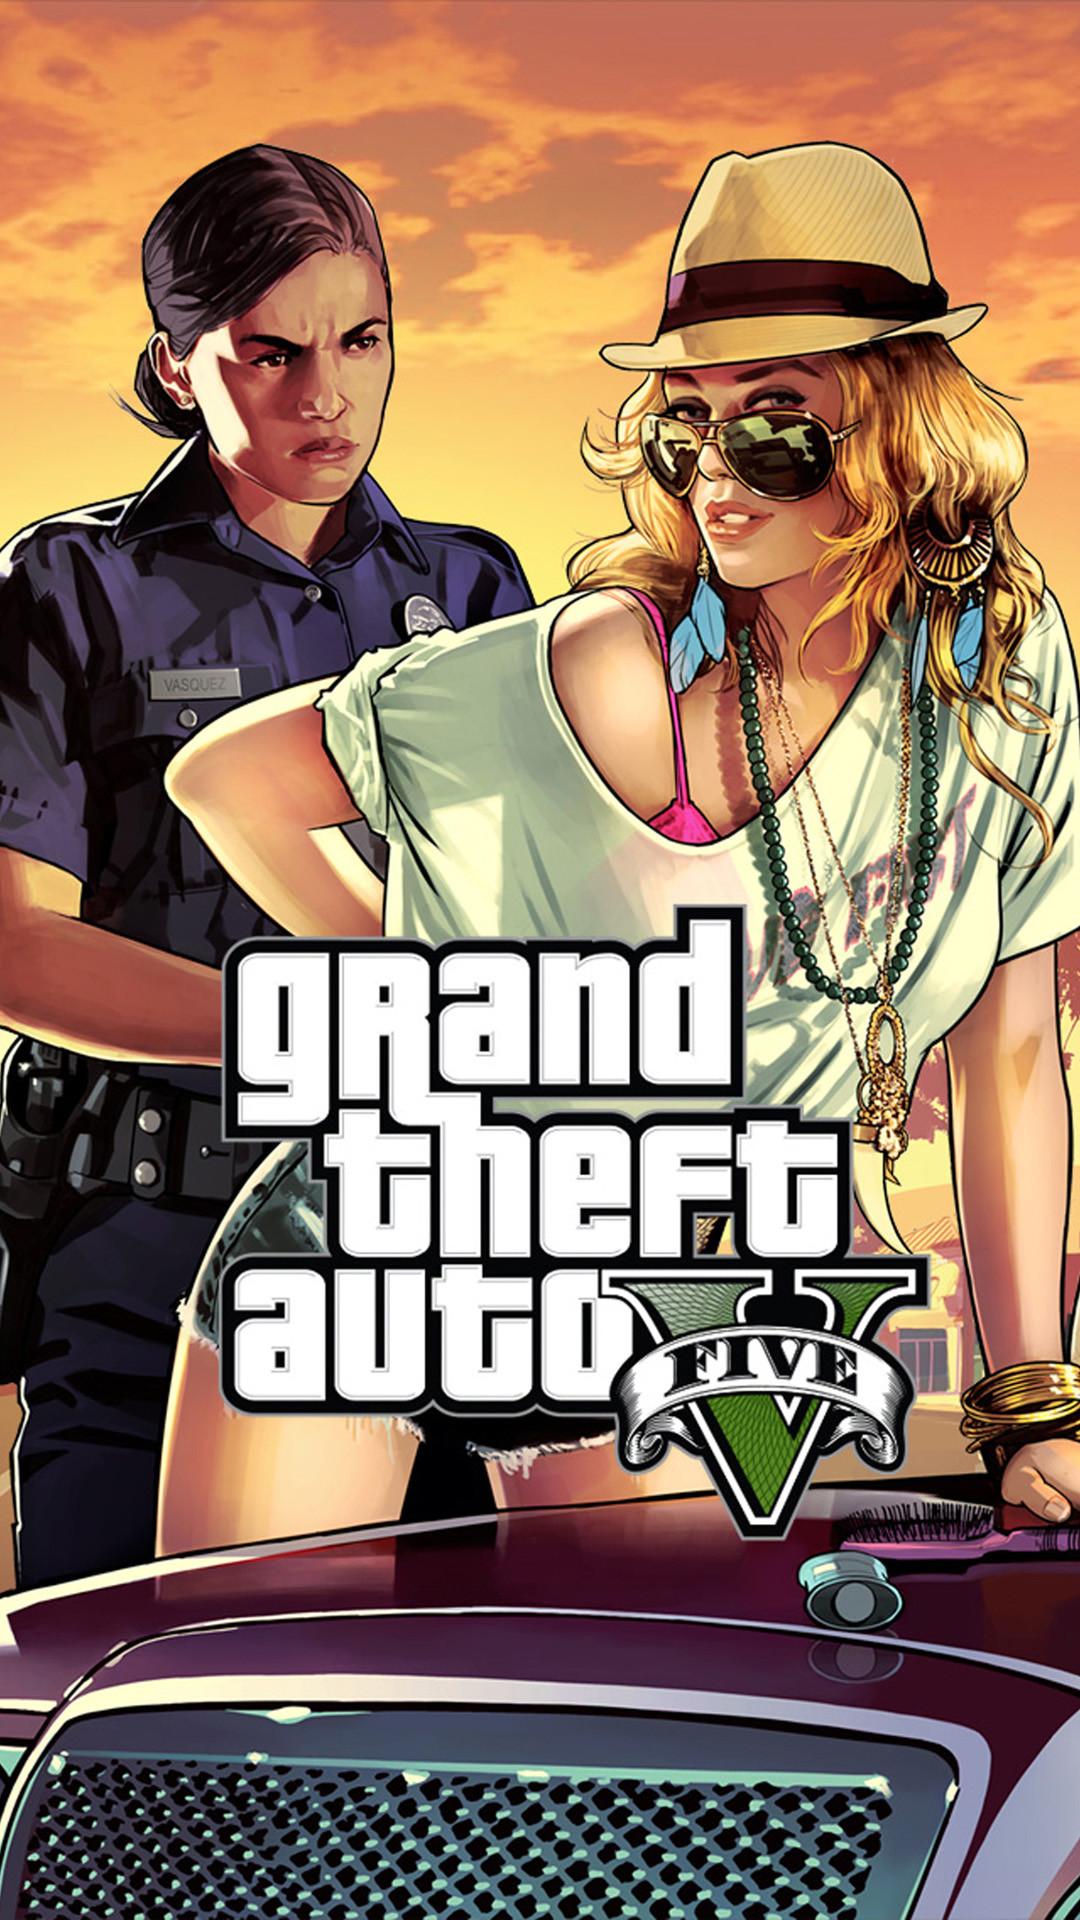 Gta 5 Hd Wallpapers For Mobile